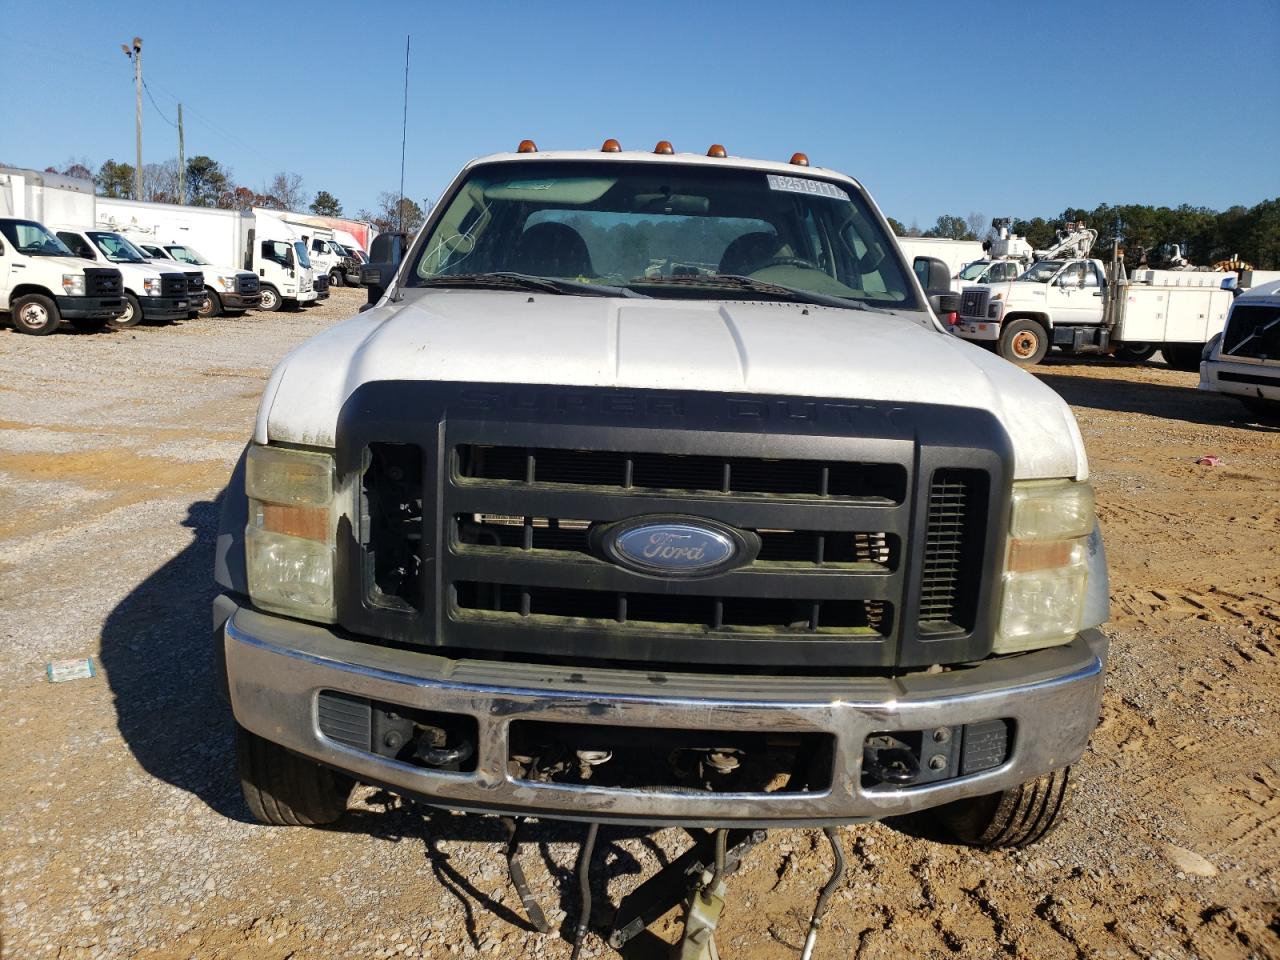 1FDAW56R48E****** Used and Repairable 2008 Ford F-550 in Alabama State